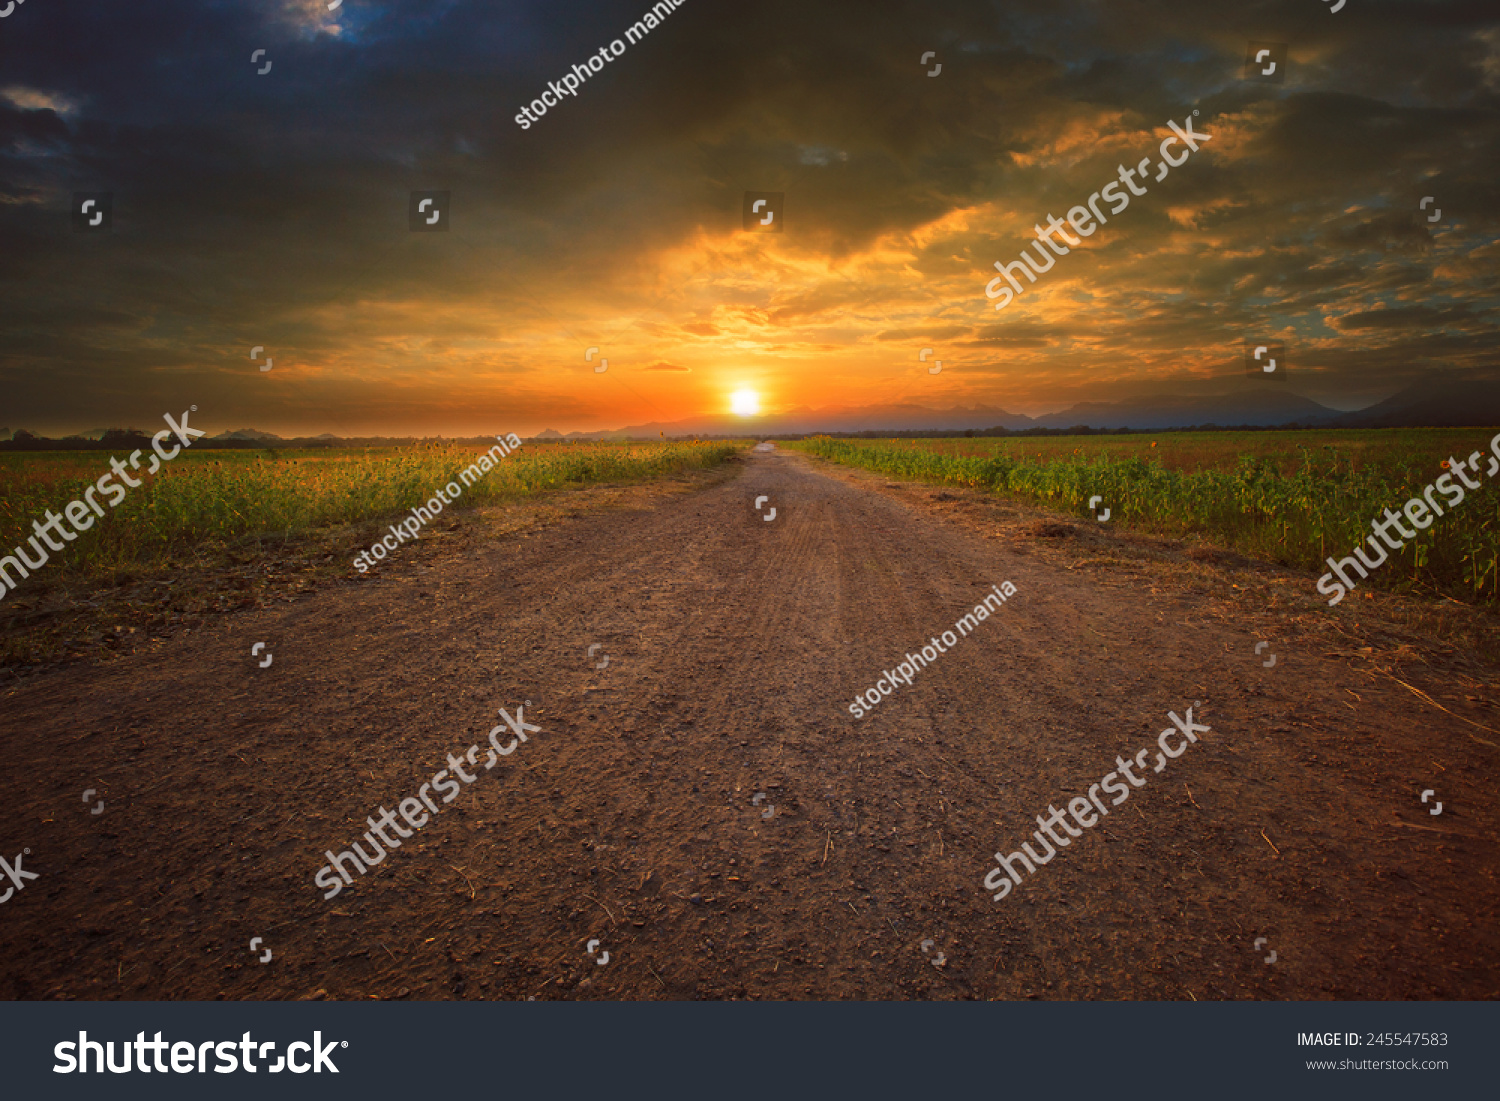 stock-photo-beautiful-land-scape-of-dust